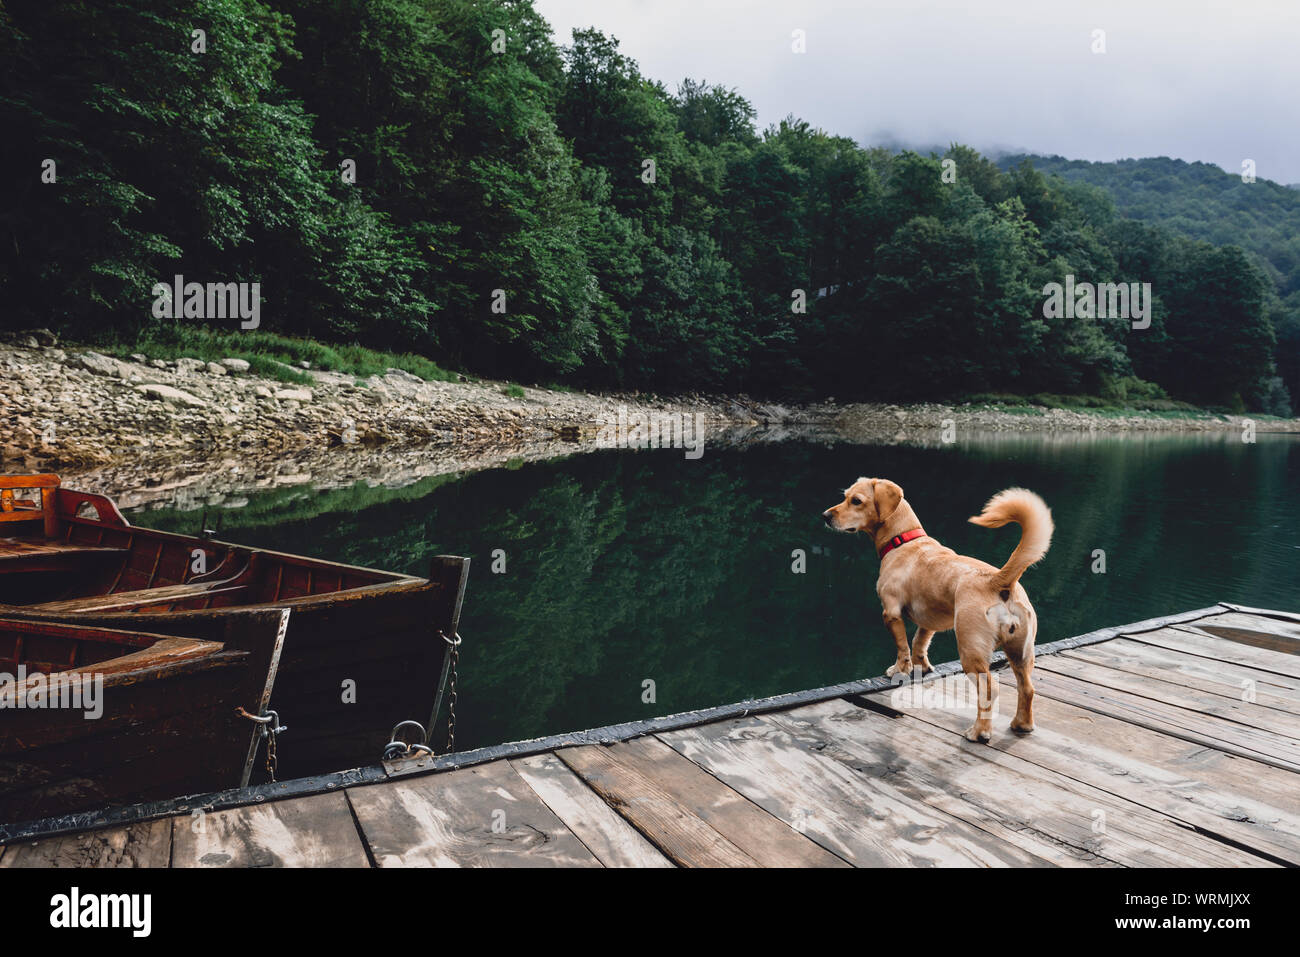 Small yellow dog standing by the lake on the wooden pier Stock Photo